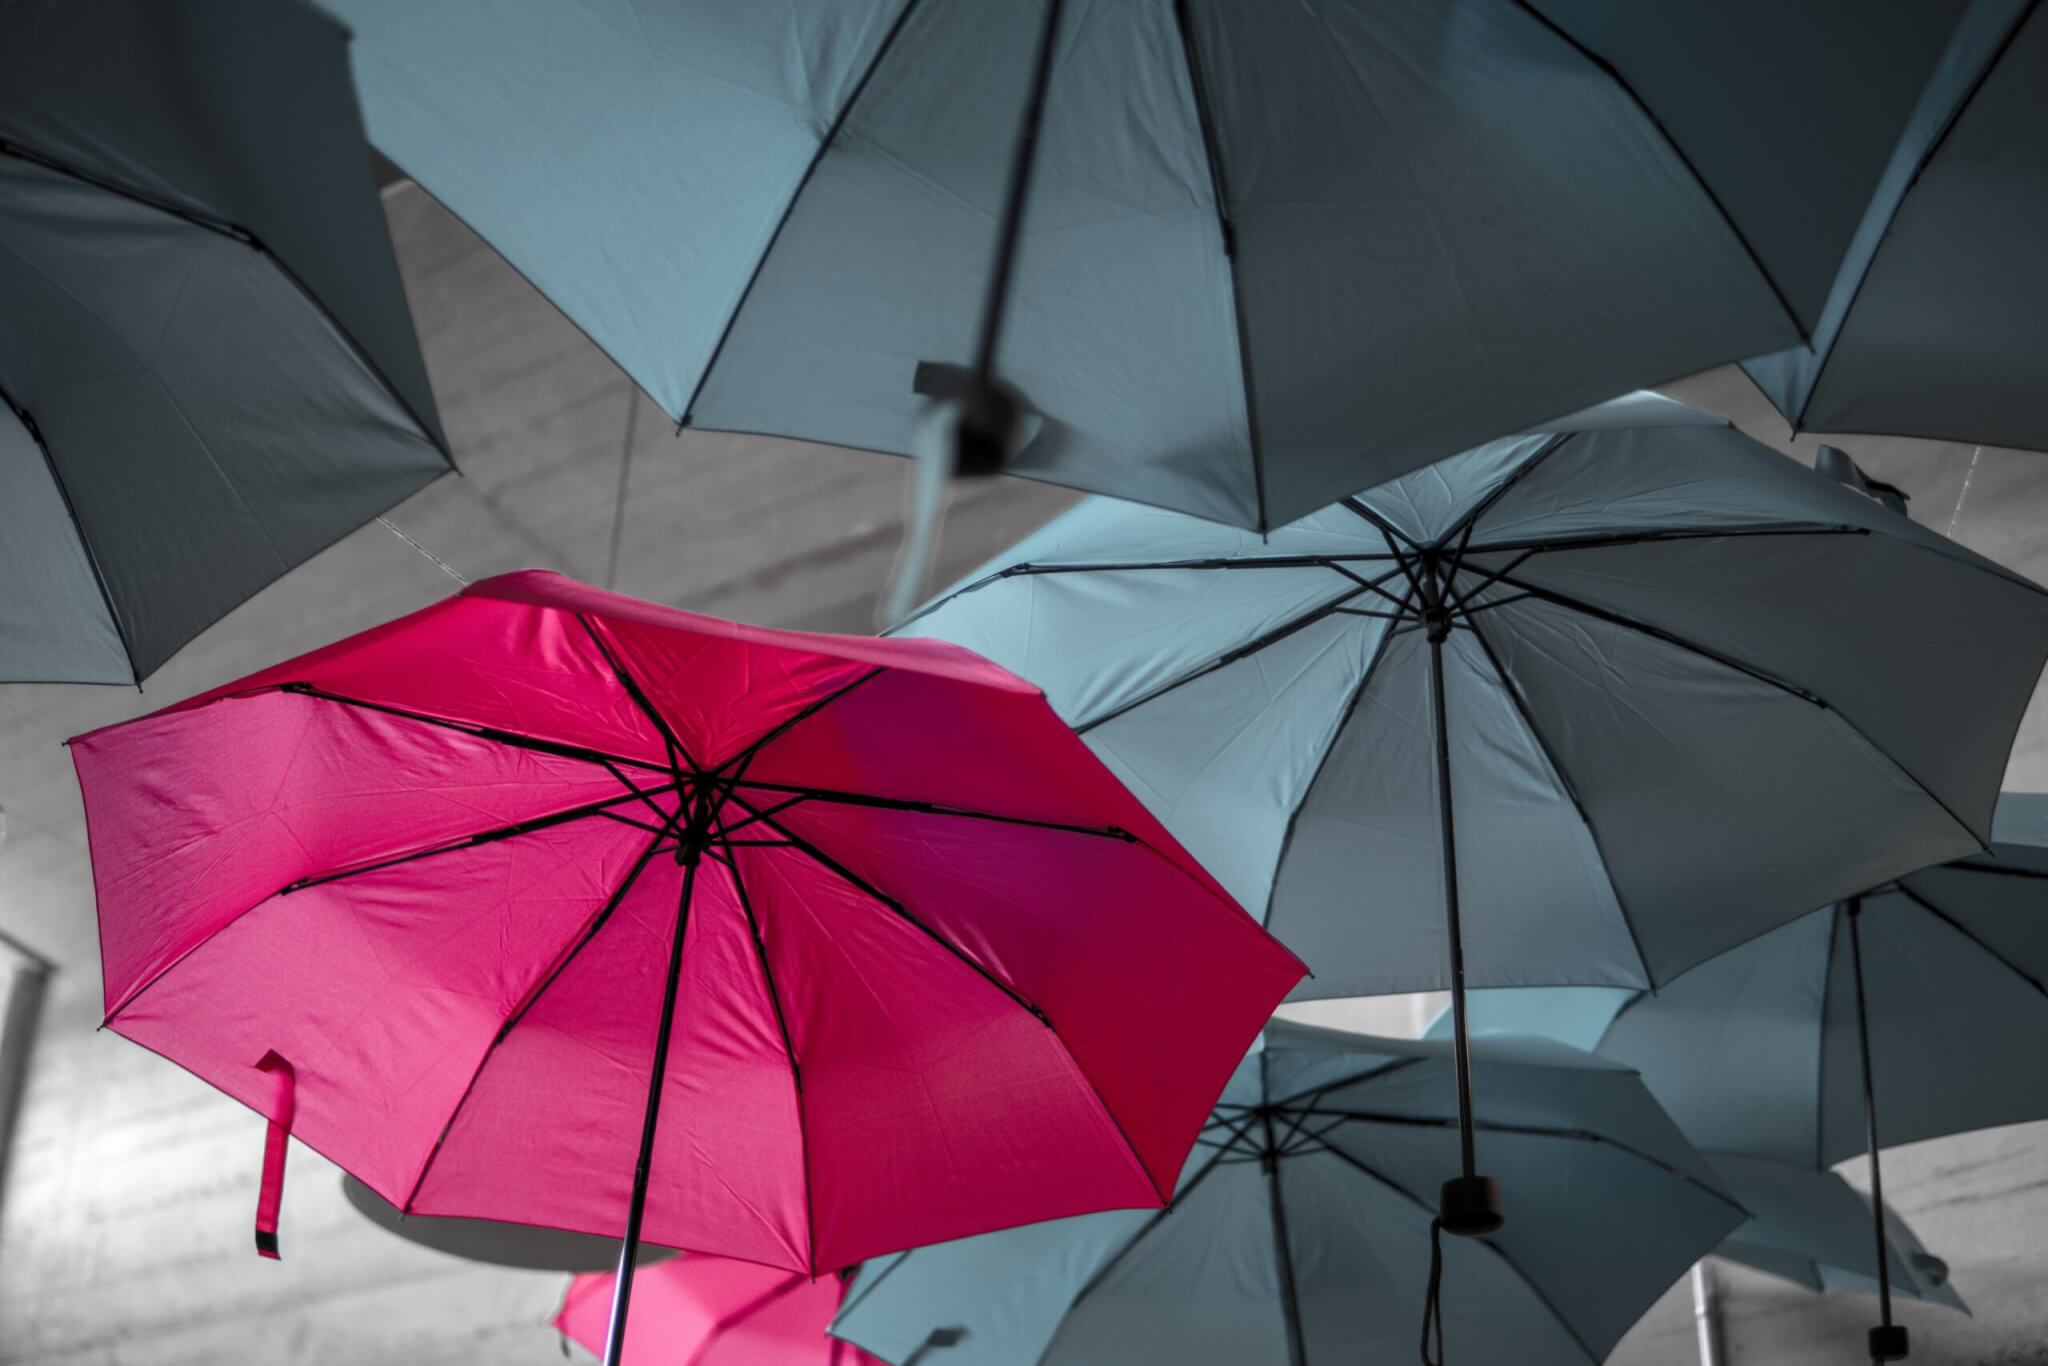 Umbrella insurance protects you in two ways.